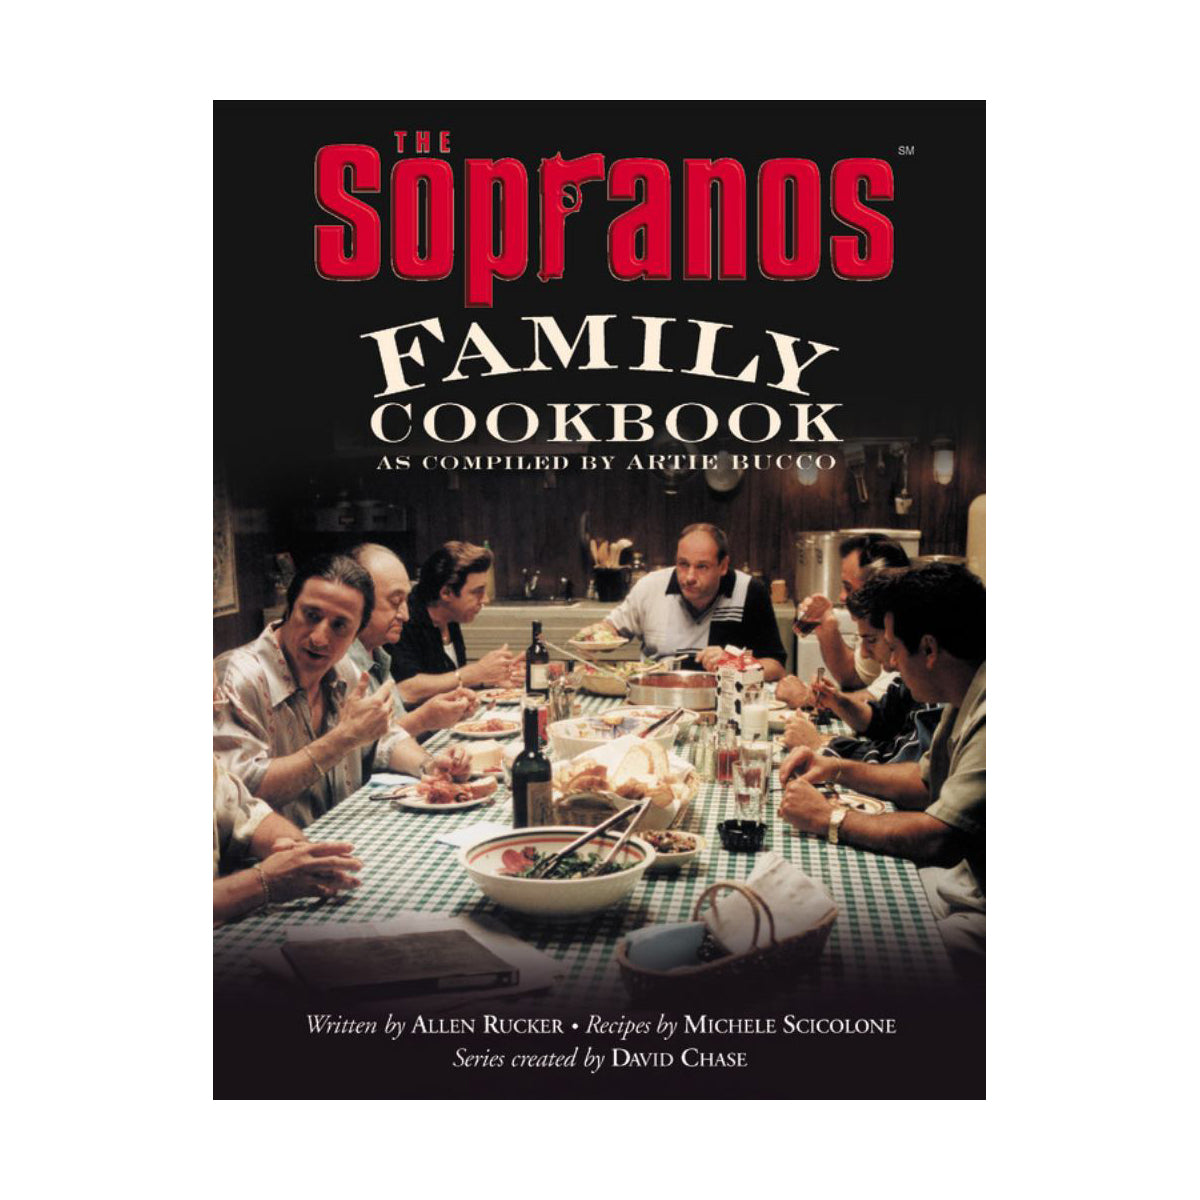 The Sopranos Family Cookbook: As Compiled by Artie Bucco [Book]